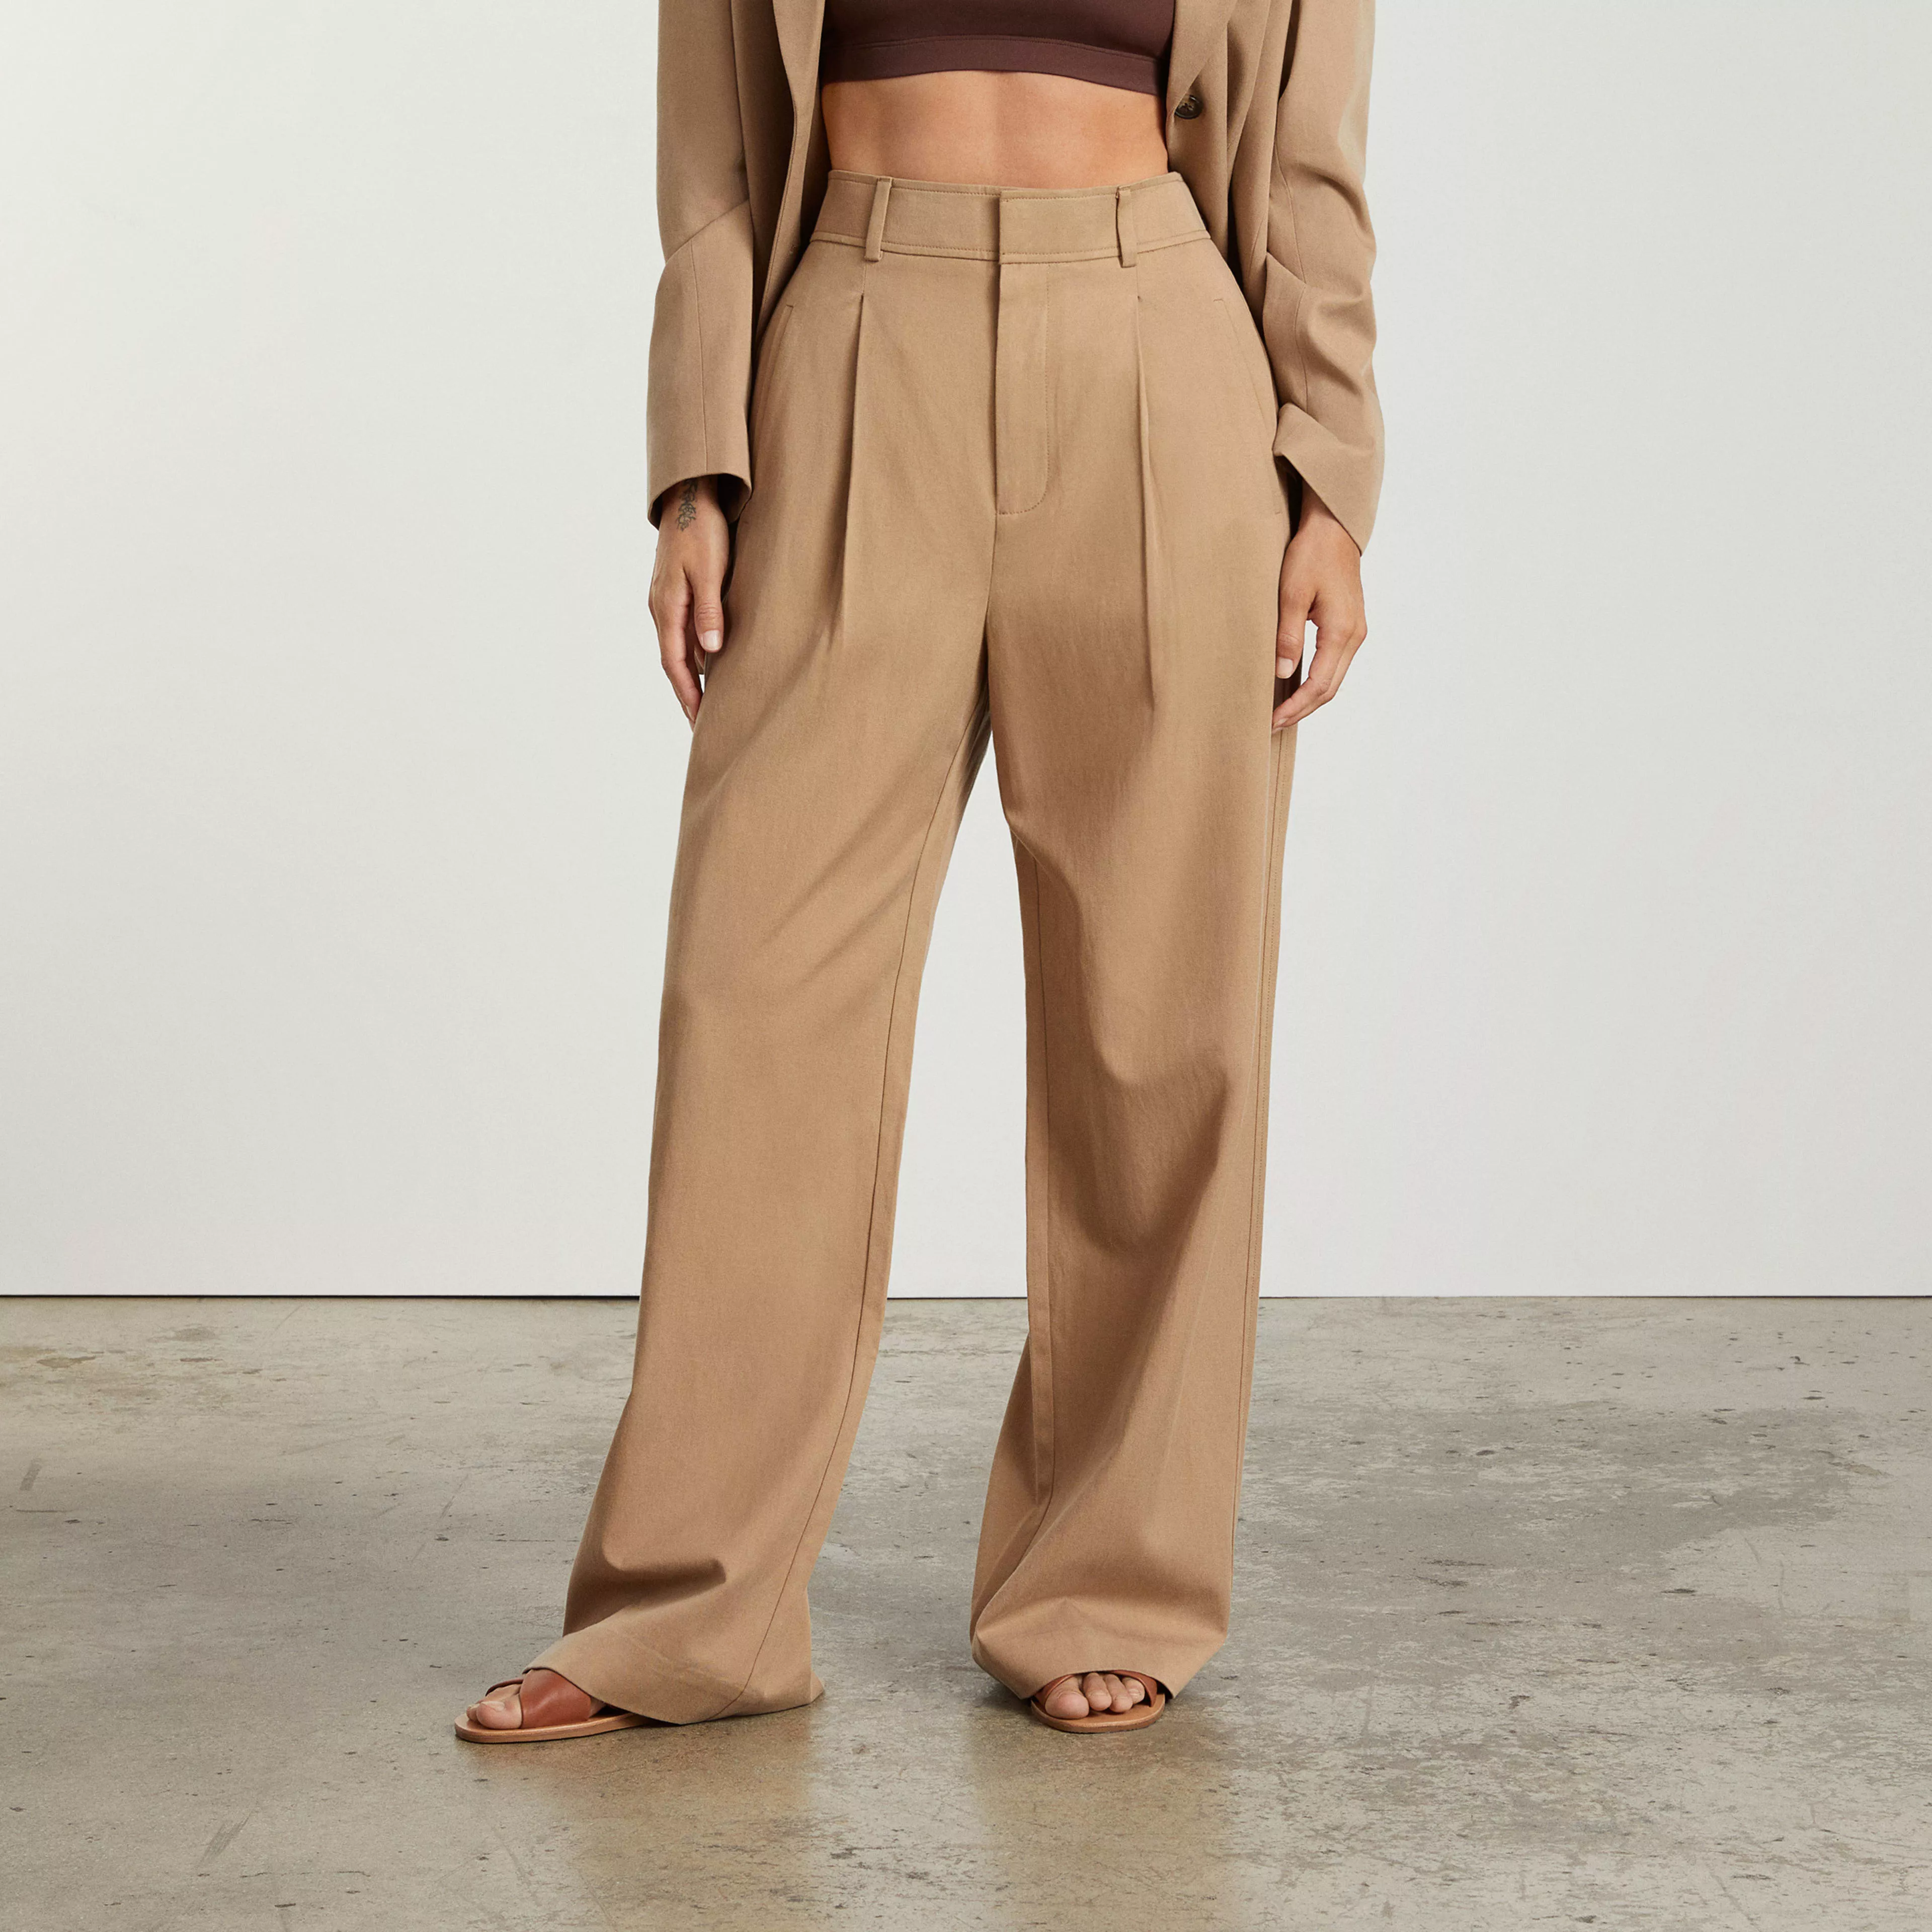 We love how versatile these Drape pants are You can wear the waistband  folded or unfolded (like the image) both ways being super comfy…